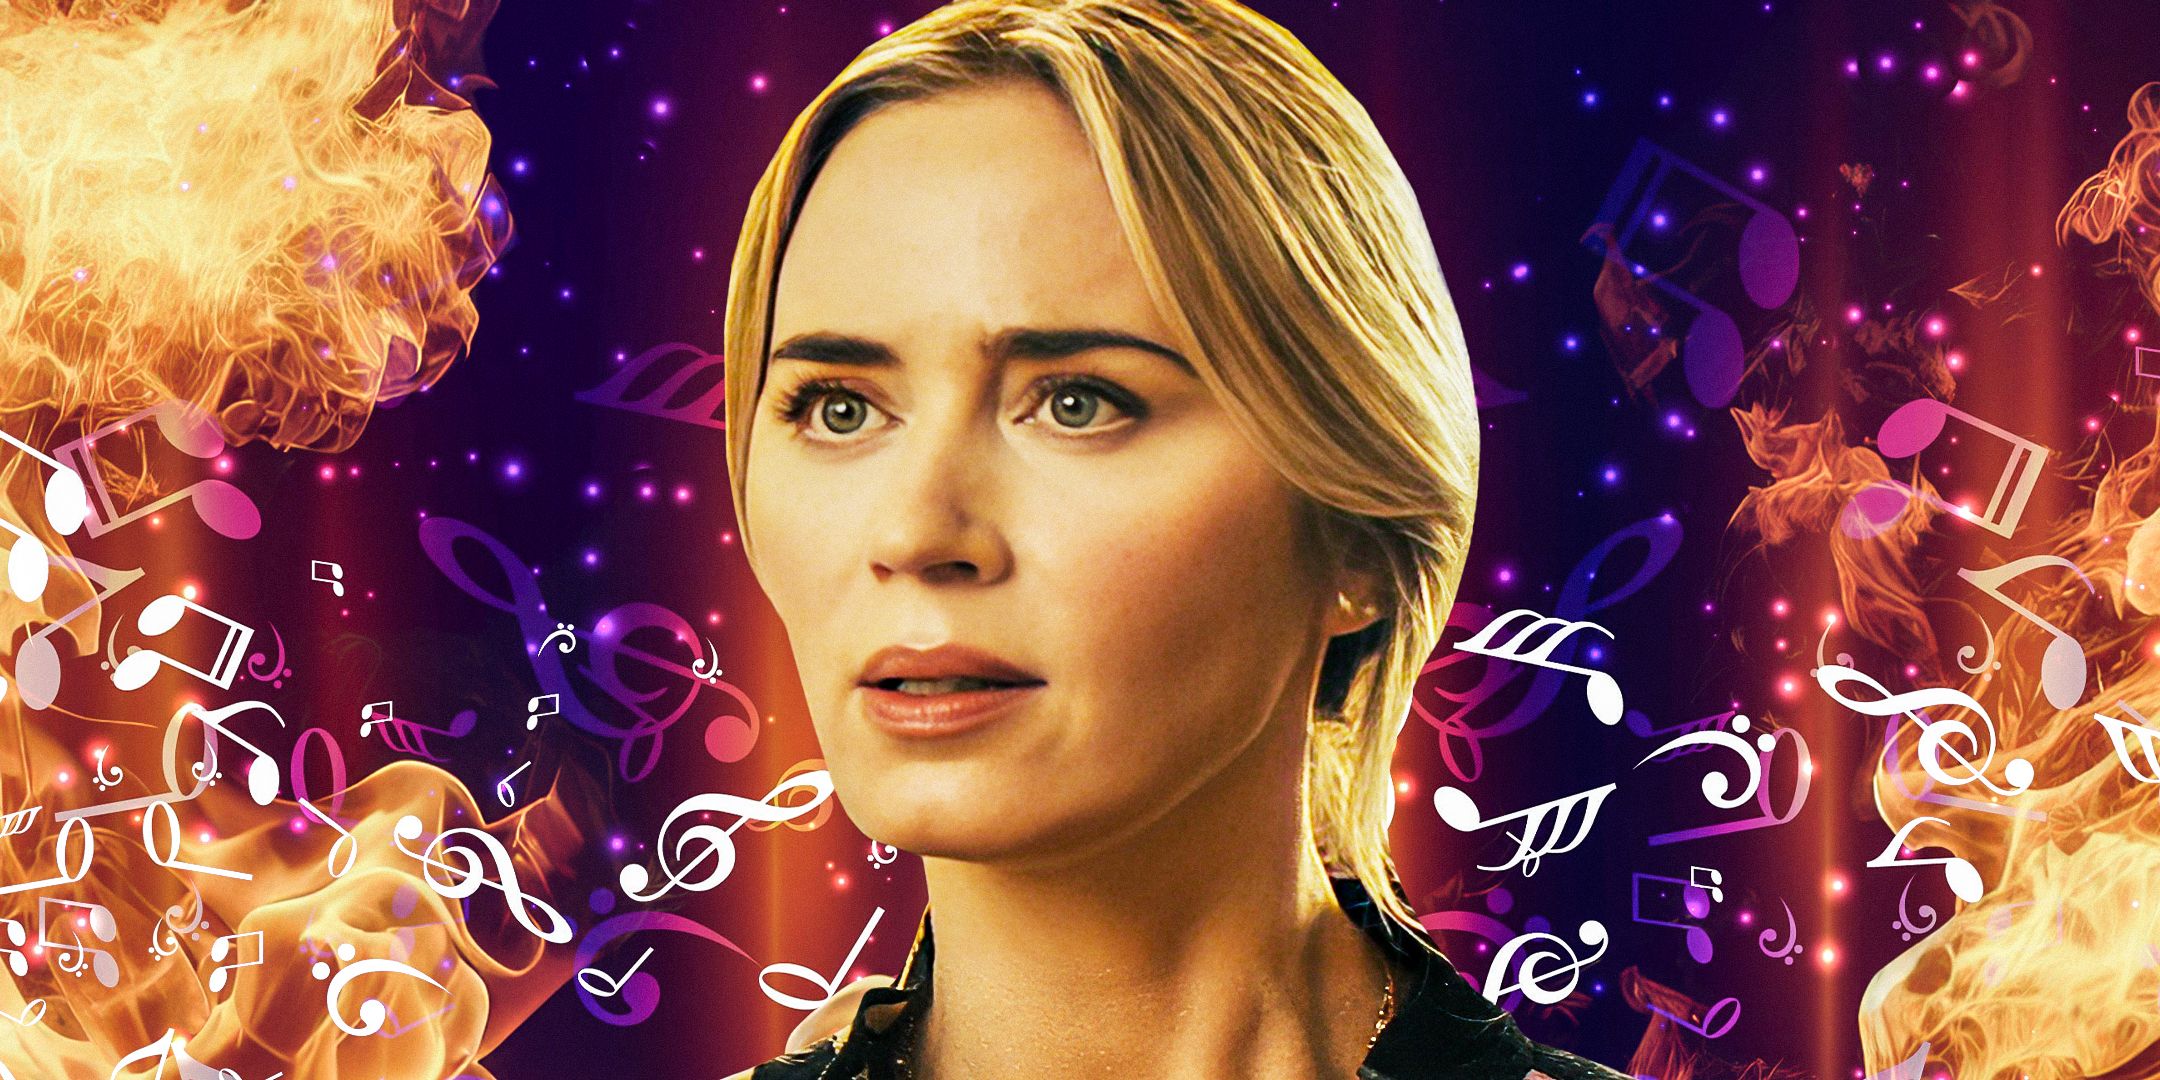 Emily Blunt as Jody Moreno from The Fall Guy with music notes behind her